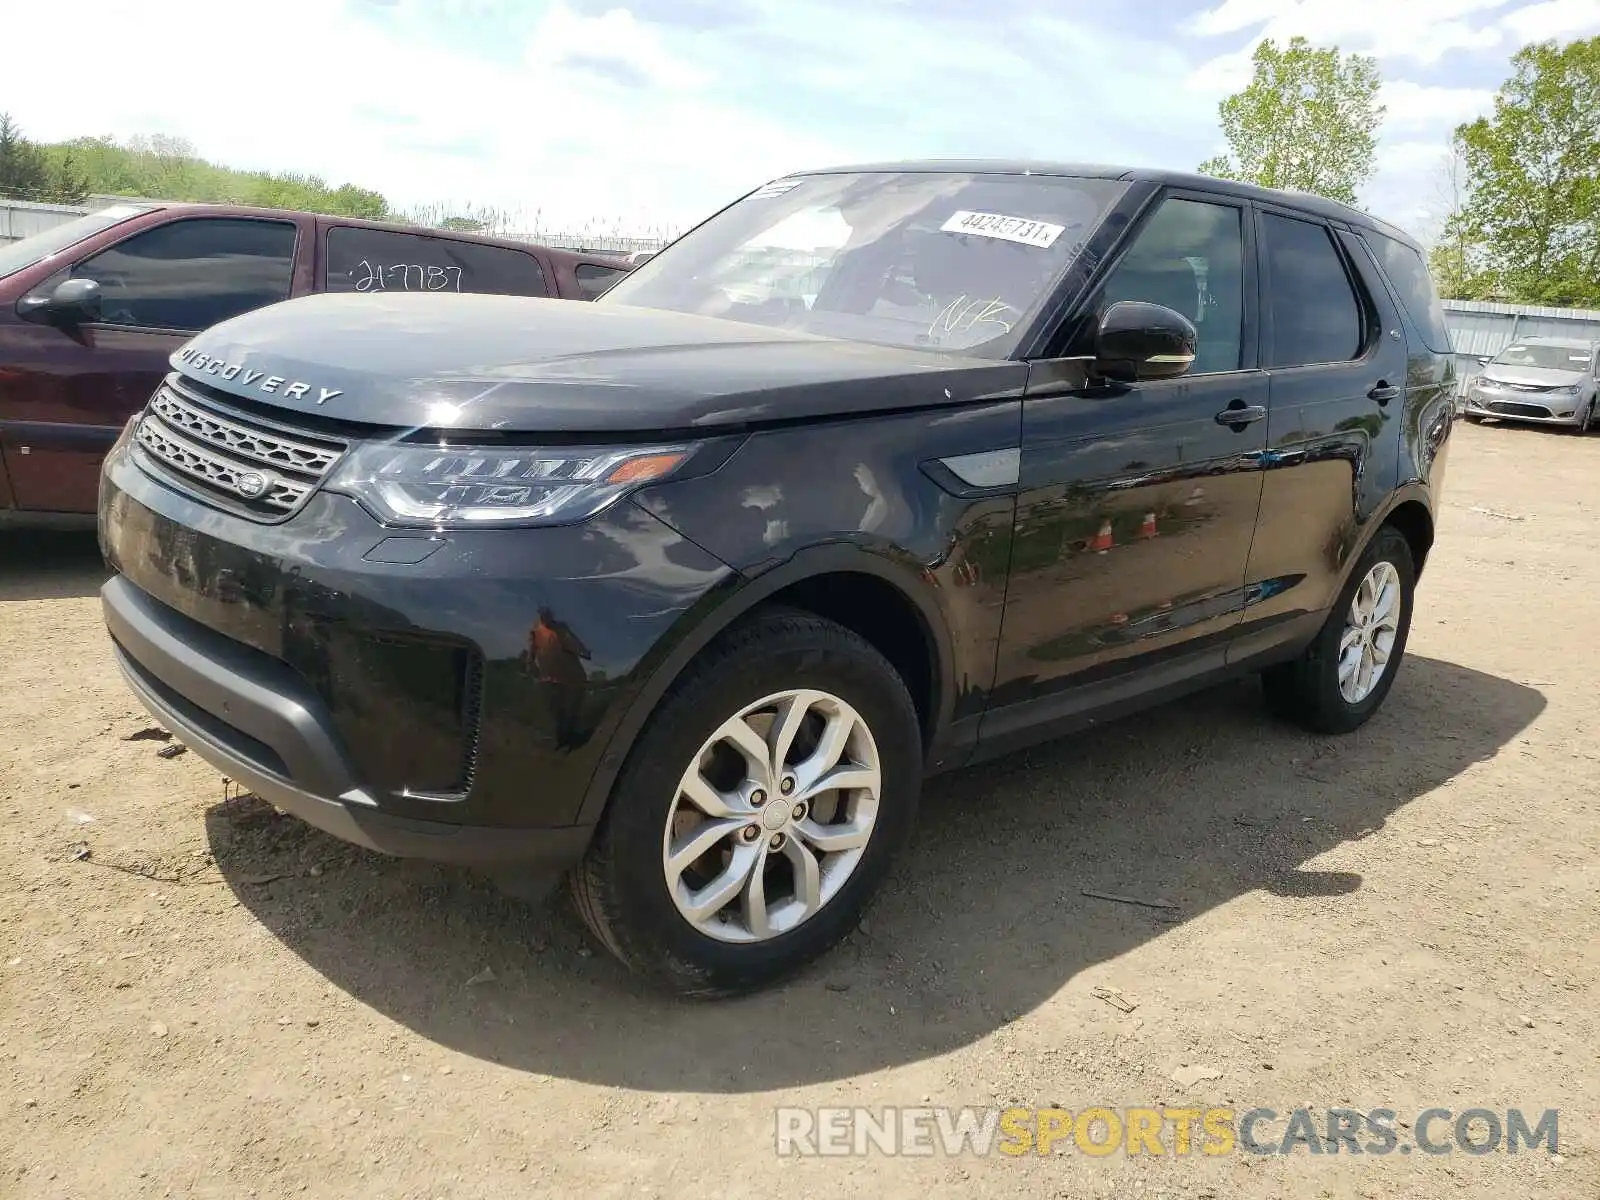 2 Photograph of a damaged car SALRG2RV1L2428285 LAND ROVER DISCOVERY 2020